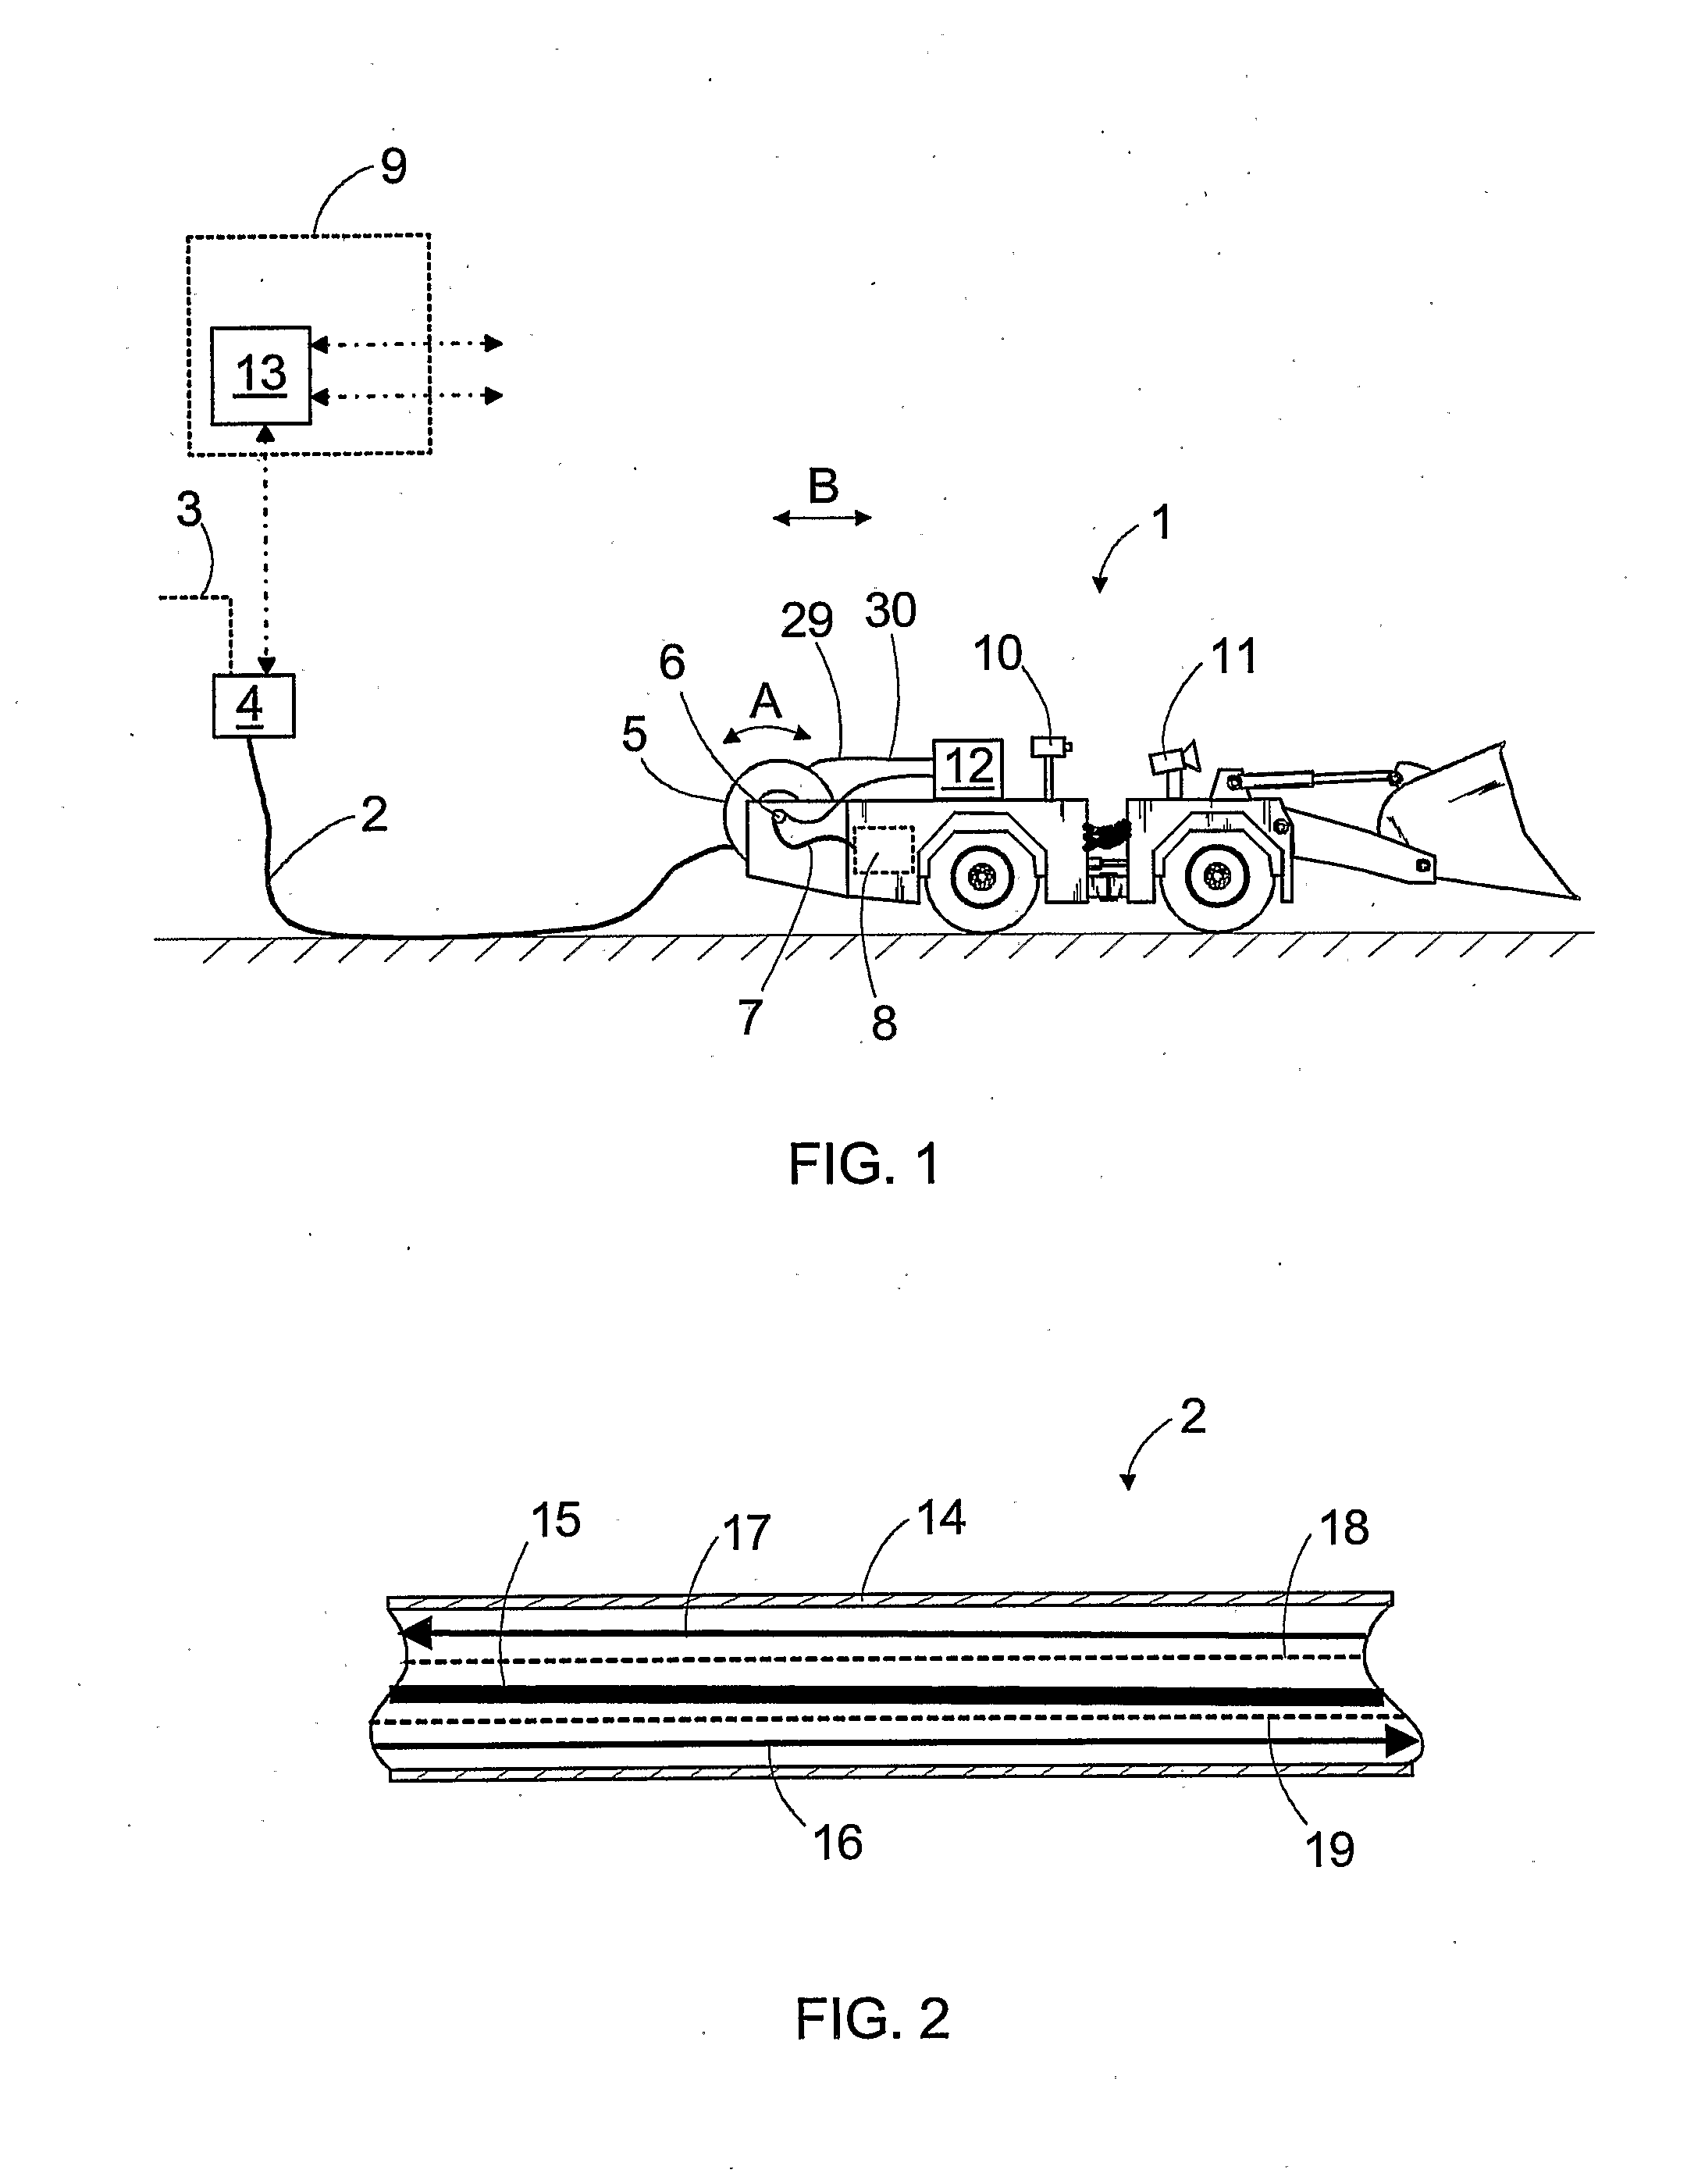 Arrangement for data transmission in mine, and cable reel